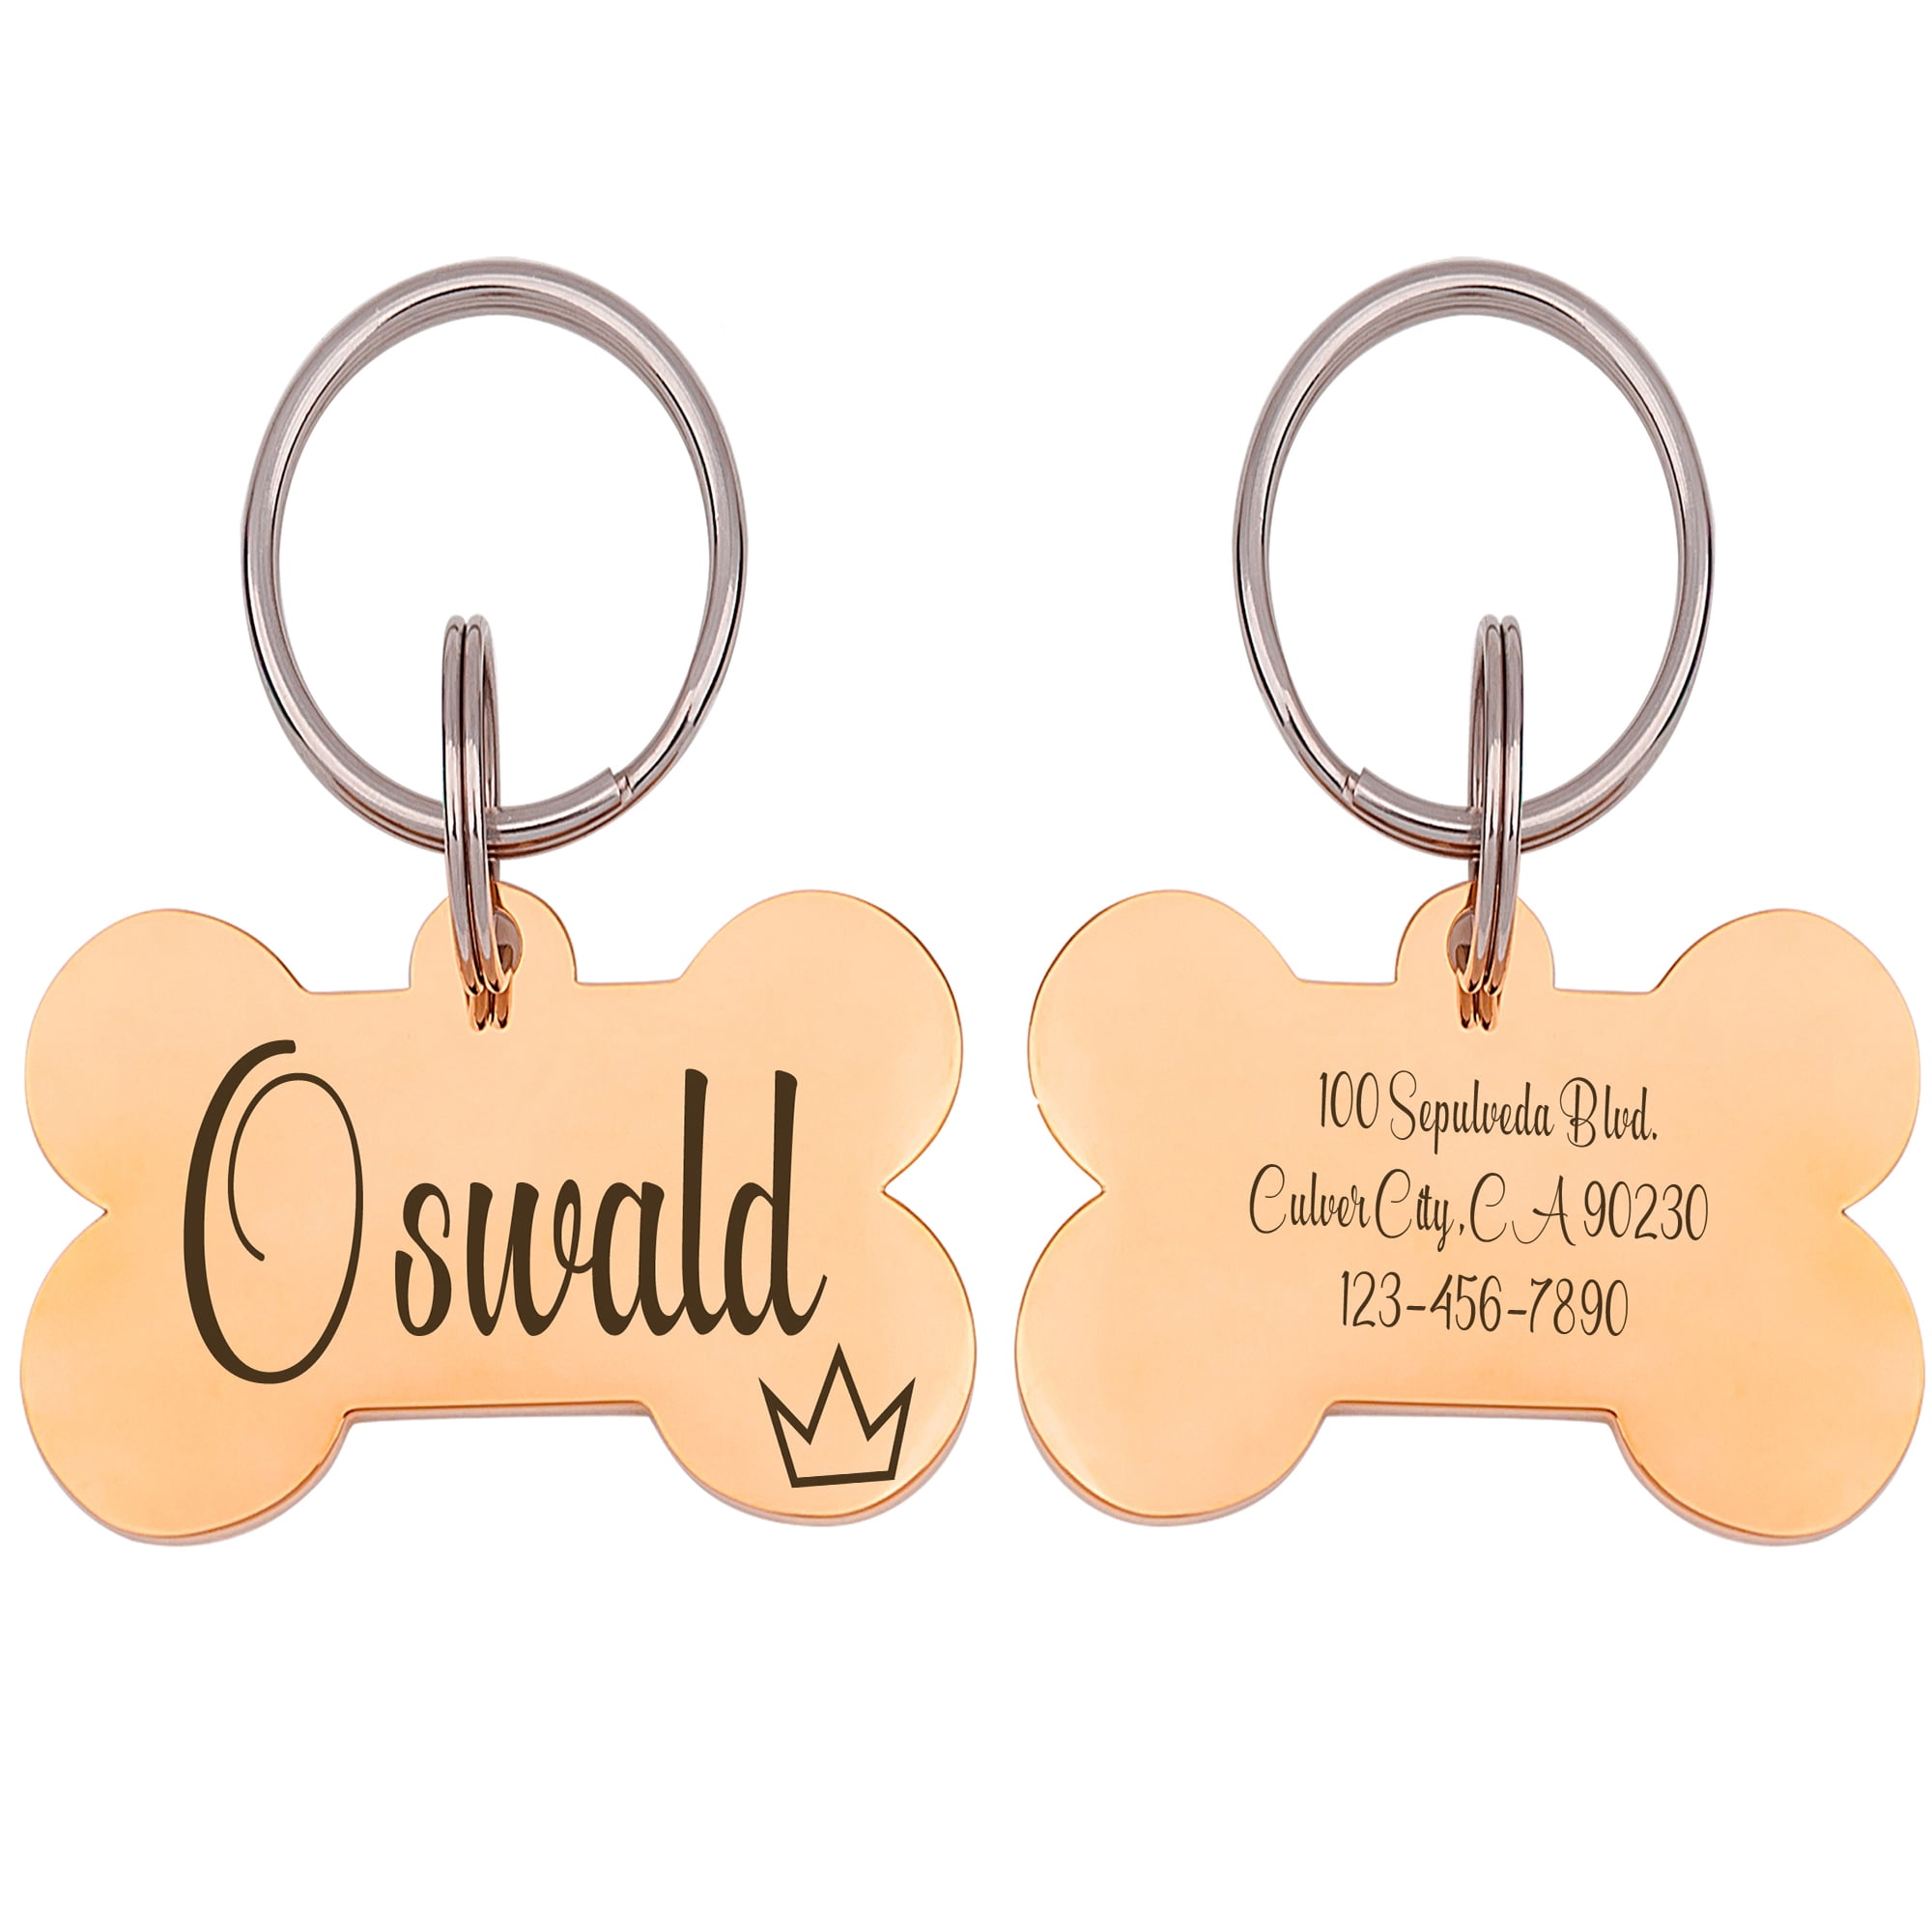 Dog Tag - Dog Tags for Dogs Personalized - Dog Name Tags - Dog Collar Tag -  Rose Gold Dog Tag with Icon - Dog Id Tags Double Sided